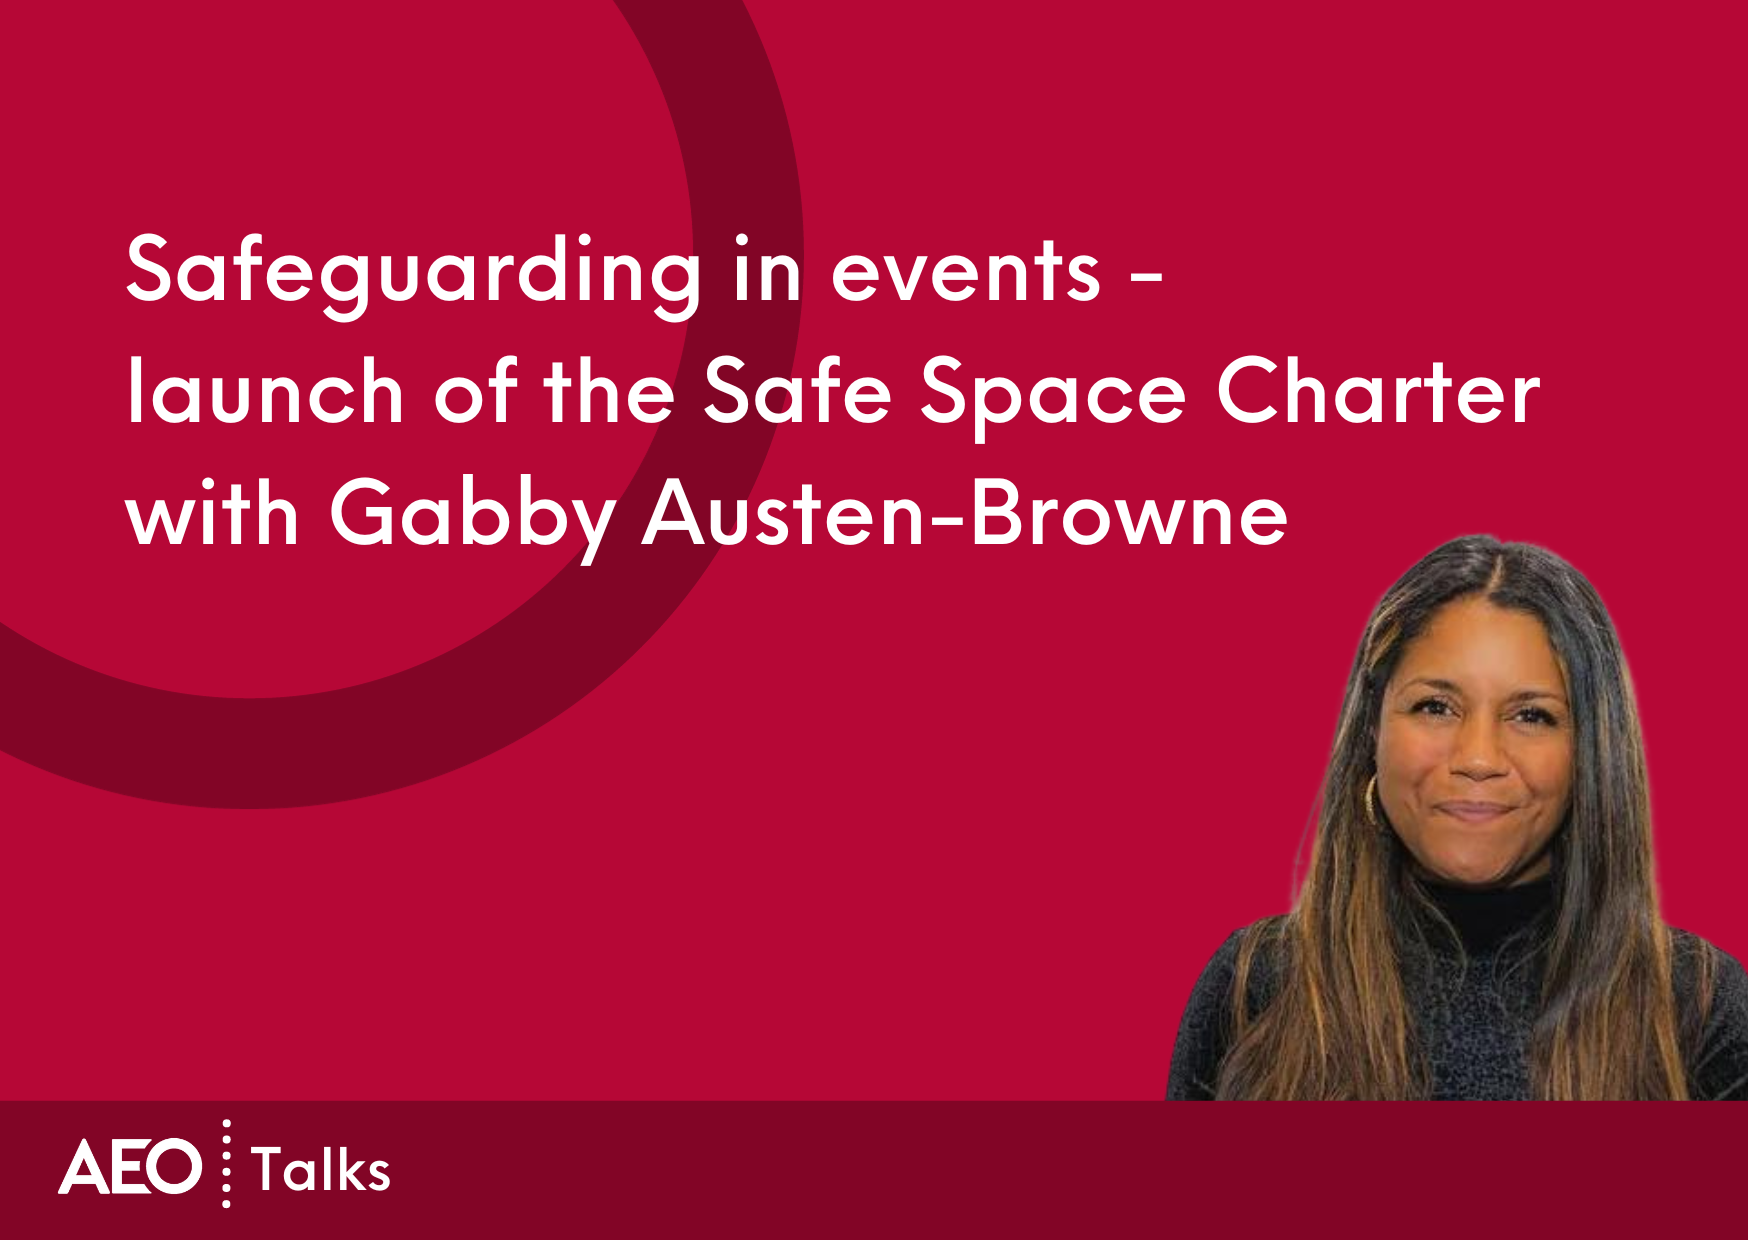 Safeguarding in events - launch of the Safe Space Charter